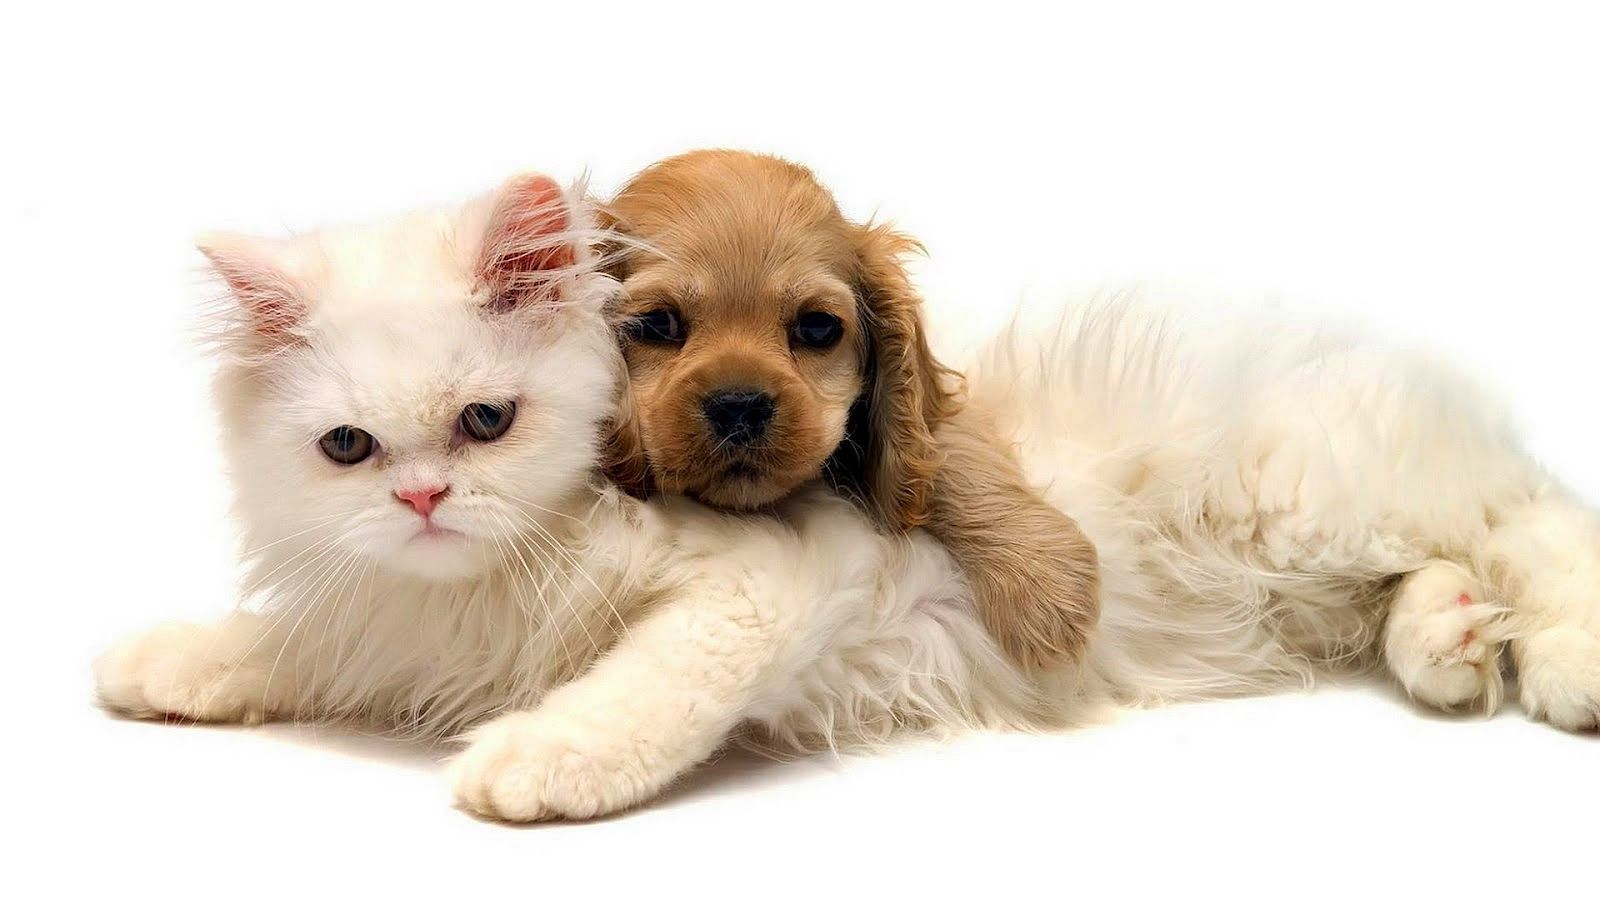 dog and cat wallpaper